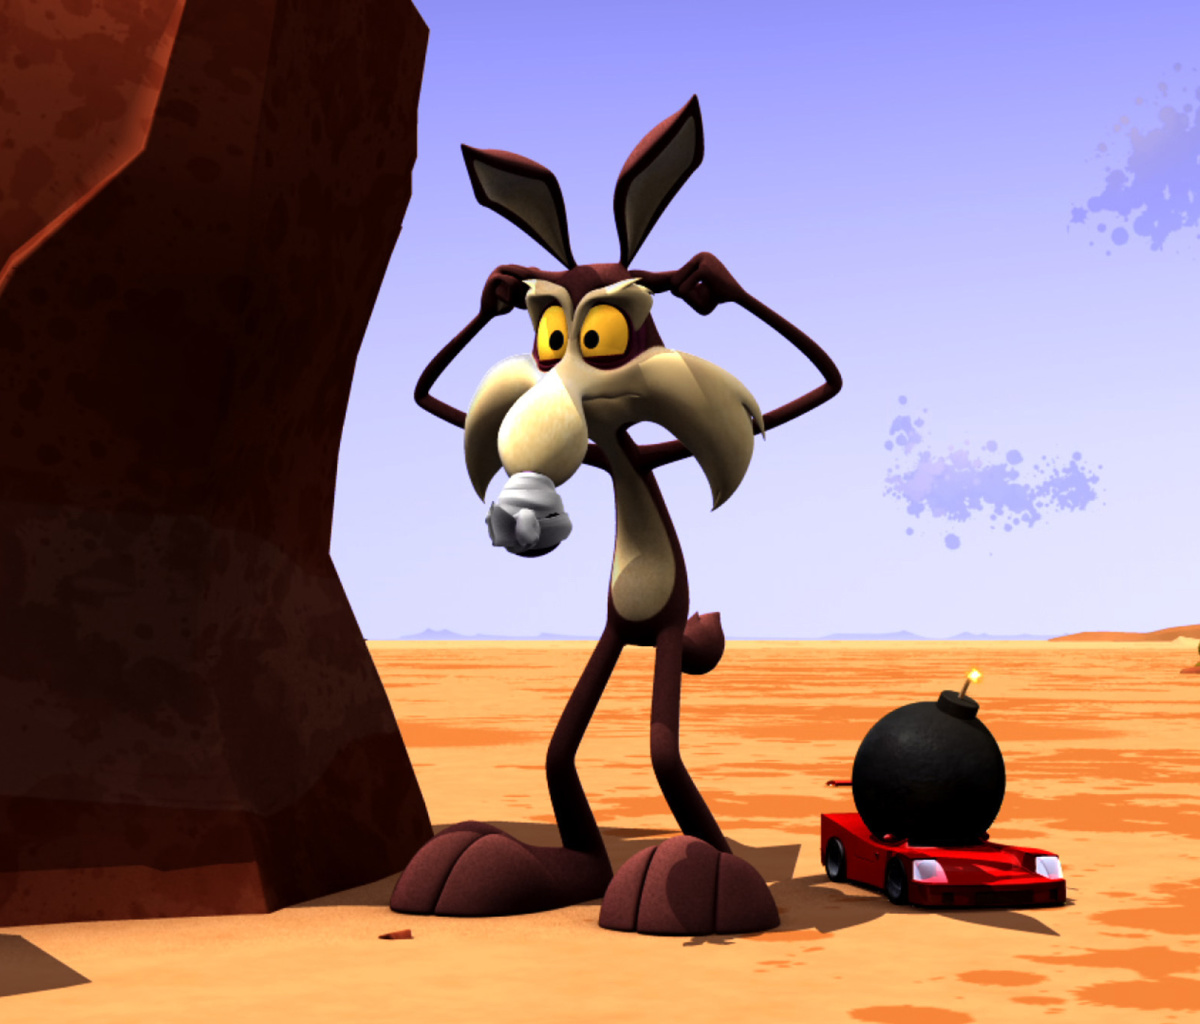 Wile E Coyote and Road Runner wallpaper 1200x1024